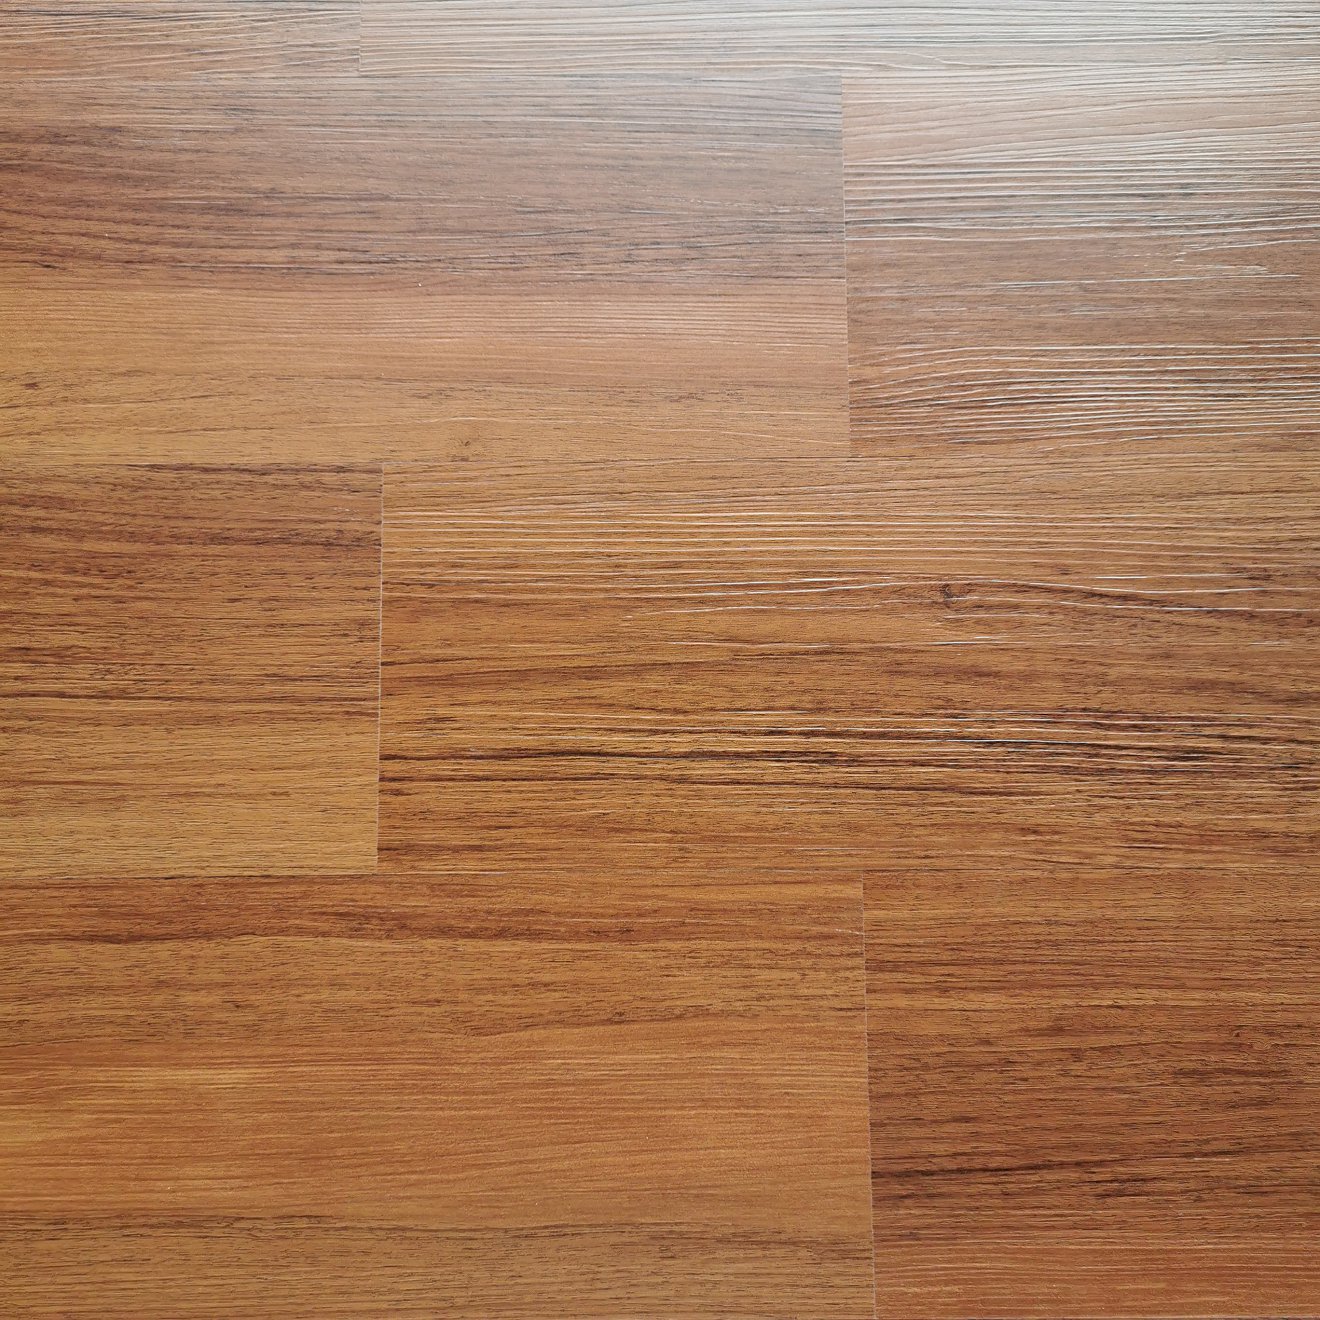 Wholesale Price Vinyl Plywood -
 LVT Flooring Use in Commercial Flooring Material Project from China Manufacture Vinyl Flooring Valinge Patent Click Indoor Hotel – Kangton